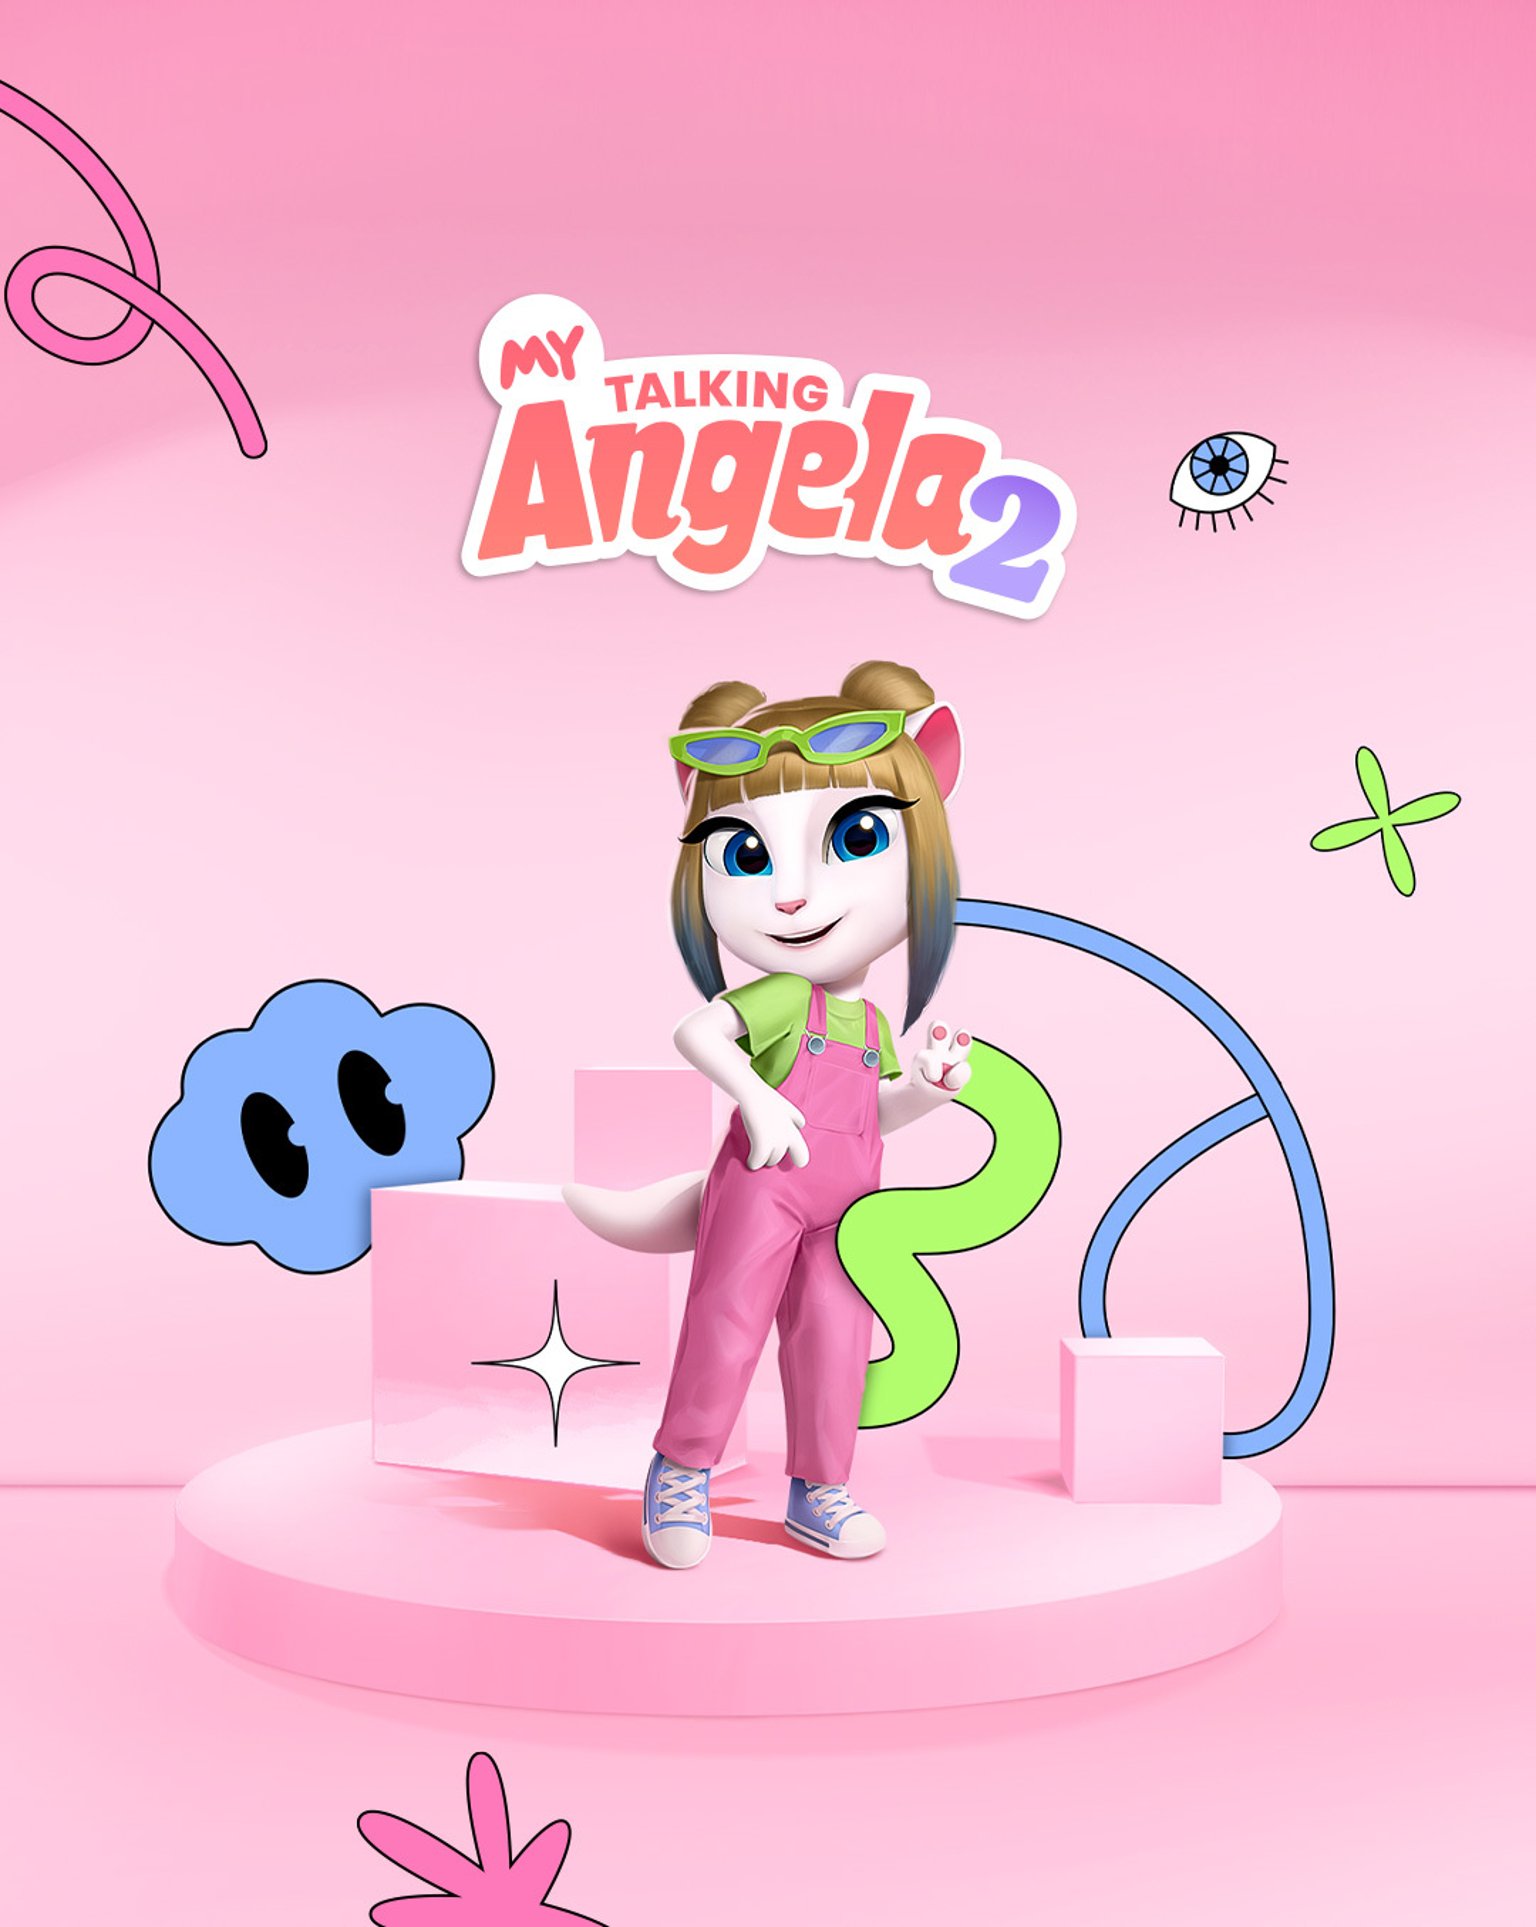 Talking Angela's Debut Fashion Collection!